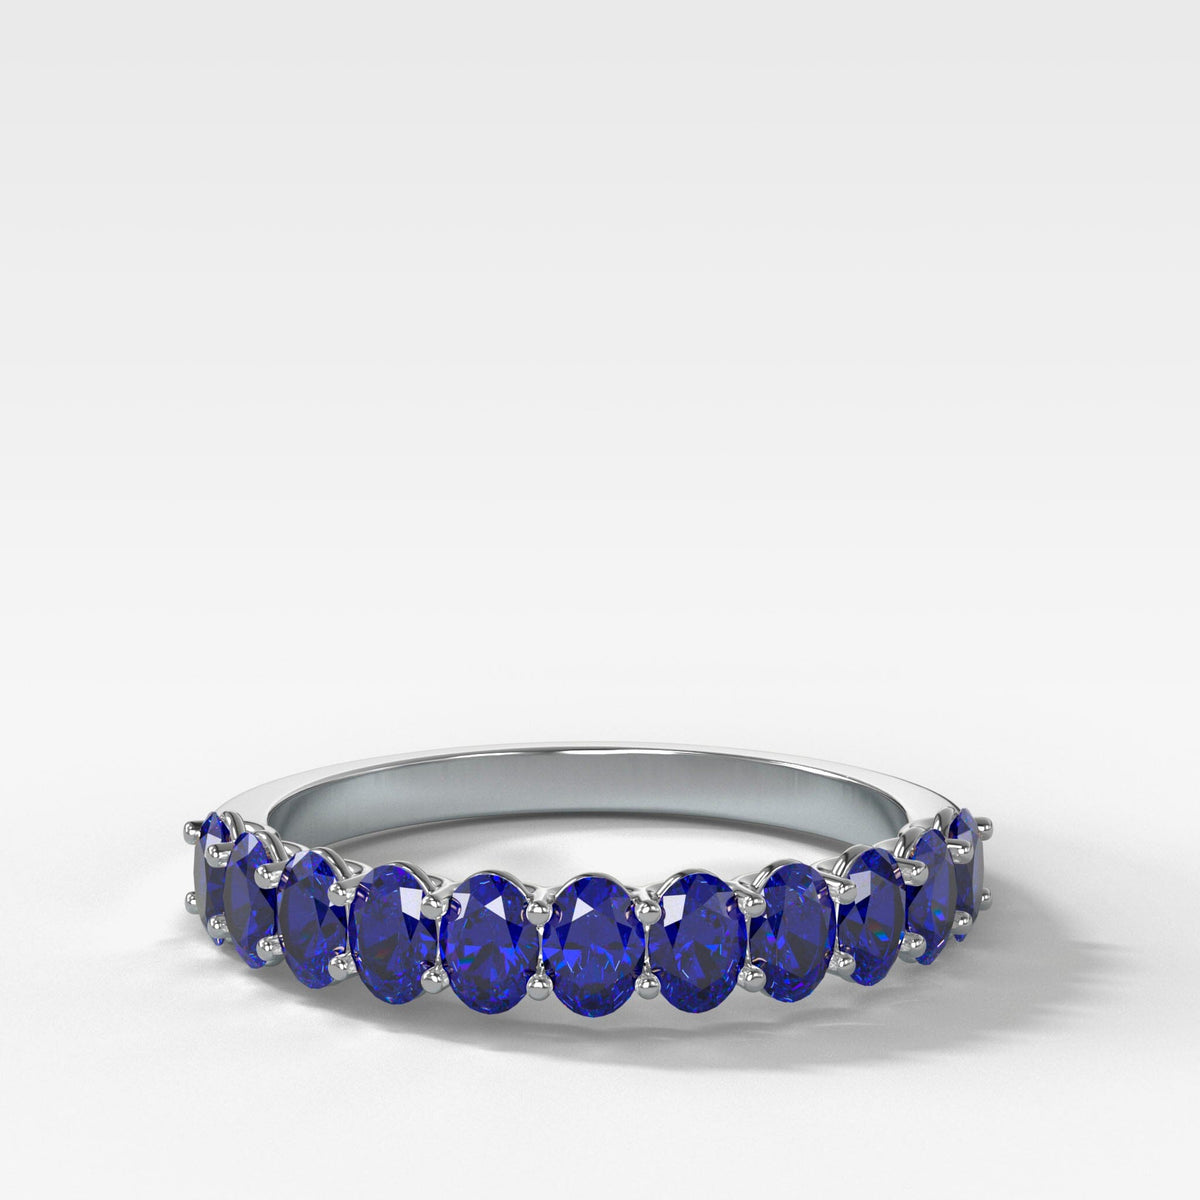 Petite Shared Prong Wedding Band with Blue Oval Sapphires Band Good Stone Inc White Gold 14k Natural